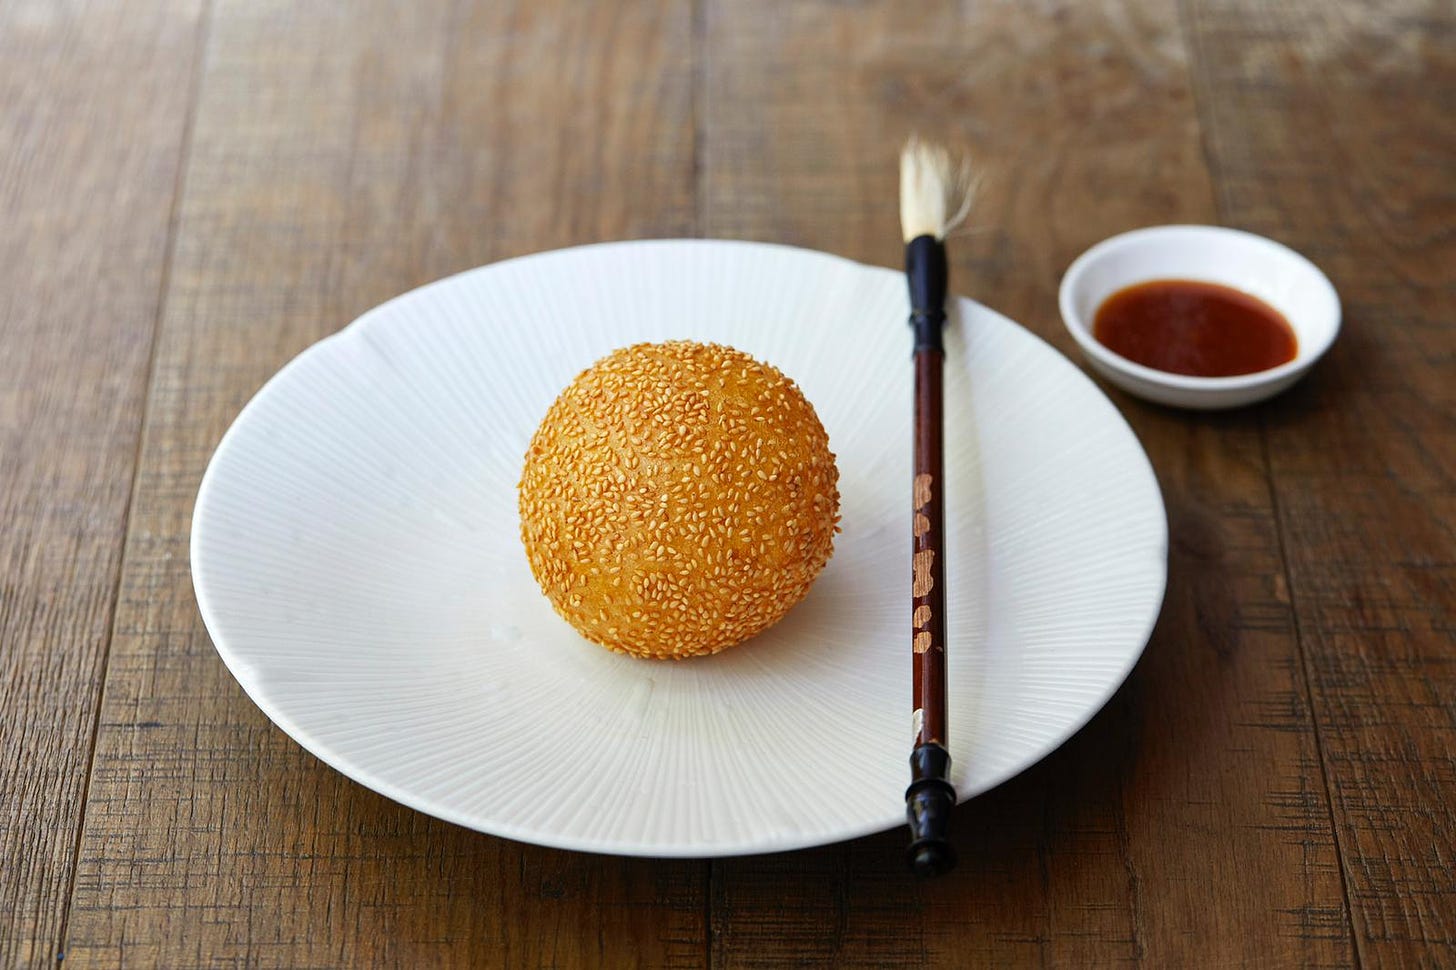 A puff ball pastry covered in sesame seeds on a small white plate. On the side of the plate is a paint brush and next to the plate is a small bowl of red coloured sauce. Plate, bowl and brush are on a wooden table